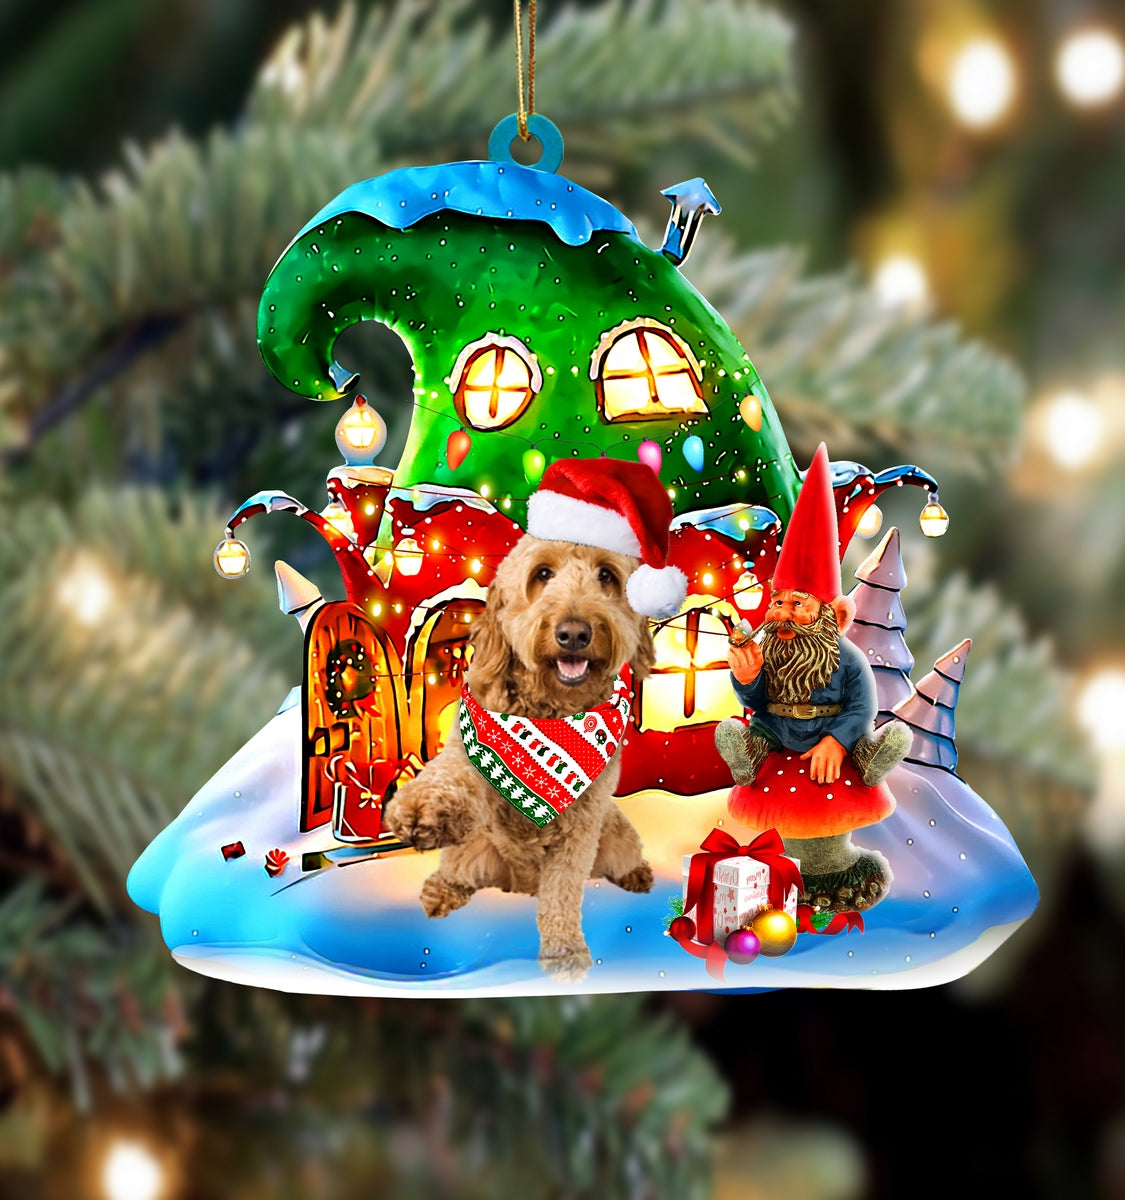 Goldendoodle With Rudolph's House Christmas Ornament